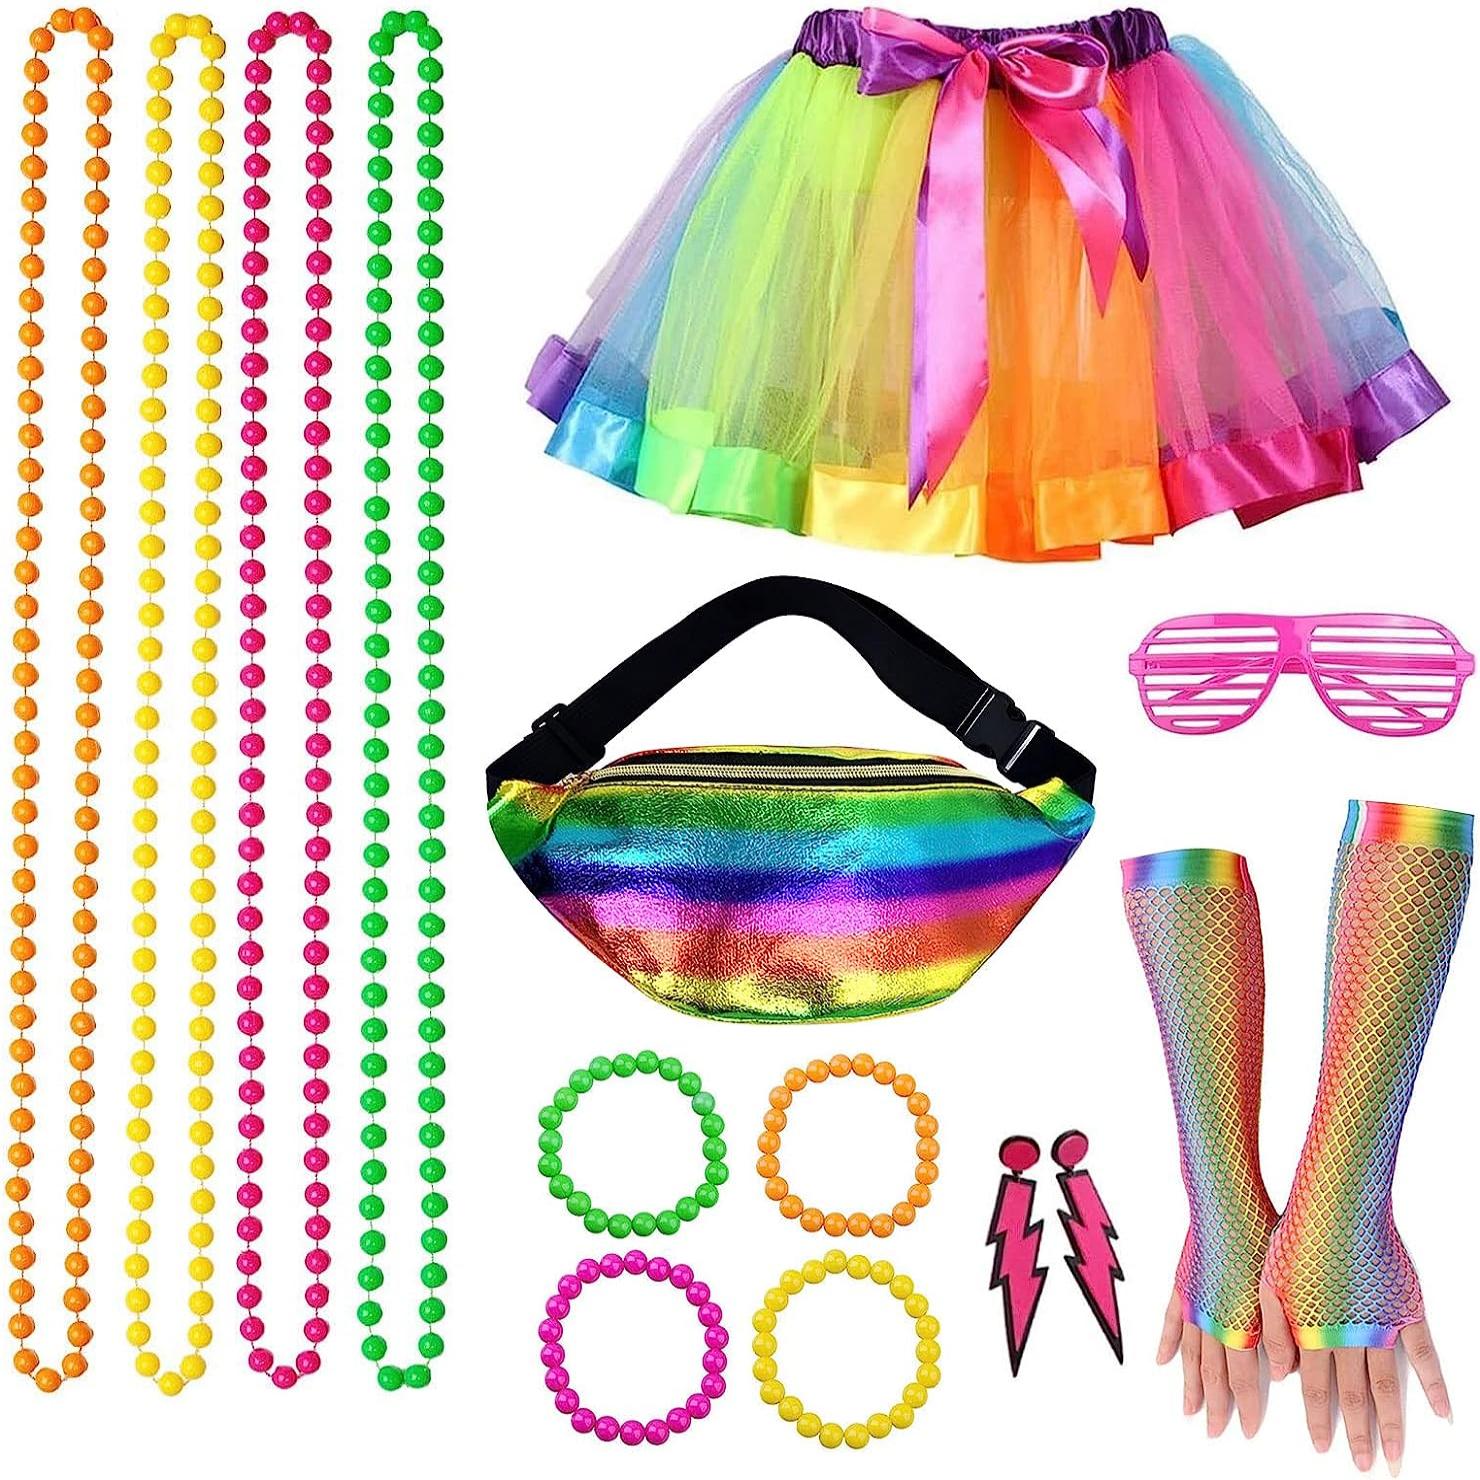 Girls 80s Costumes Accessories Set Neon Leg Warmer 70s Fancy Outfit Fishnet  Gloves Lace Headband Earrings Necklace Bracelet Disco Cosplay Retro Party